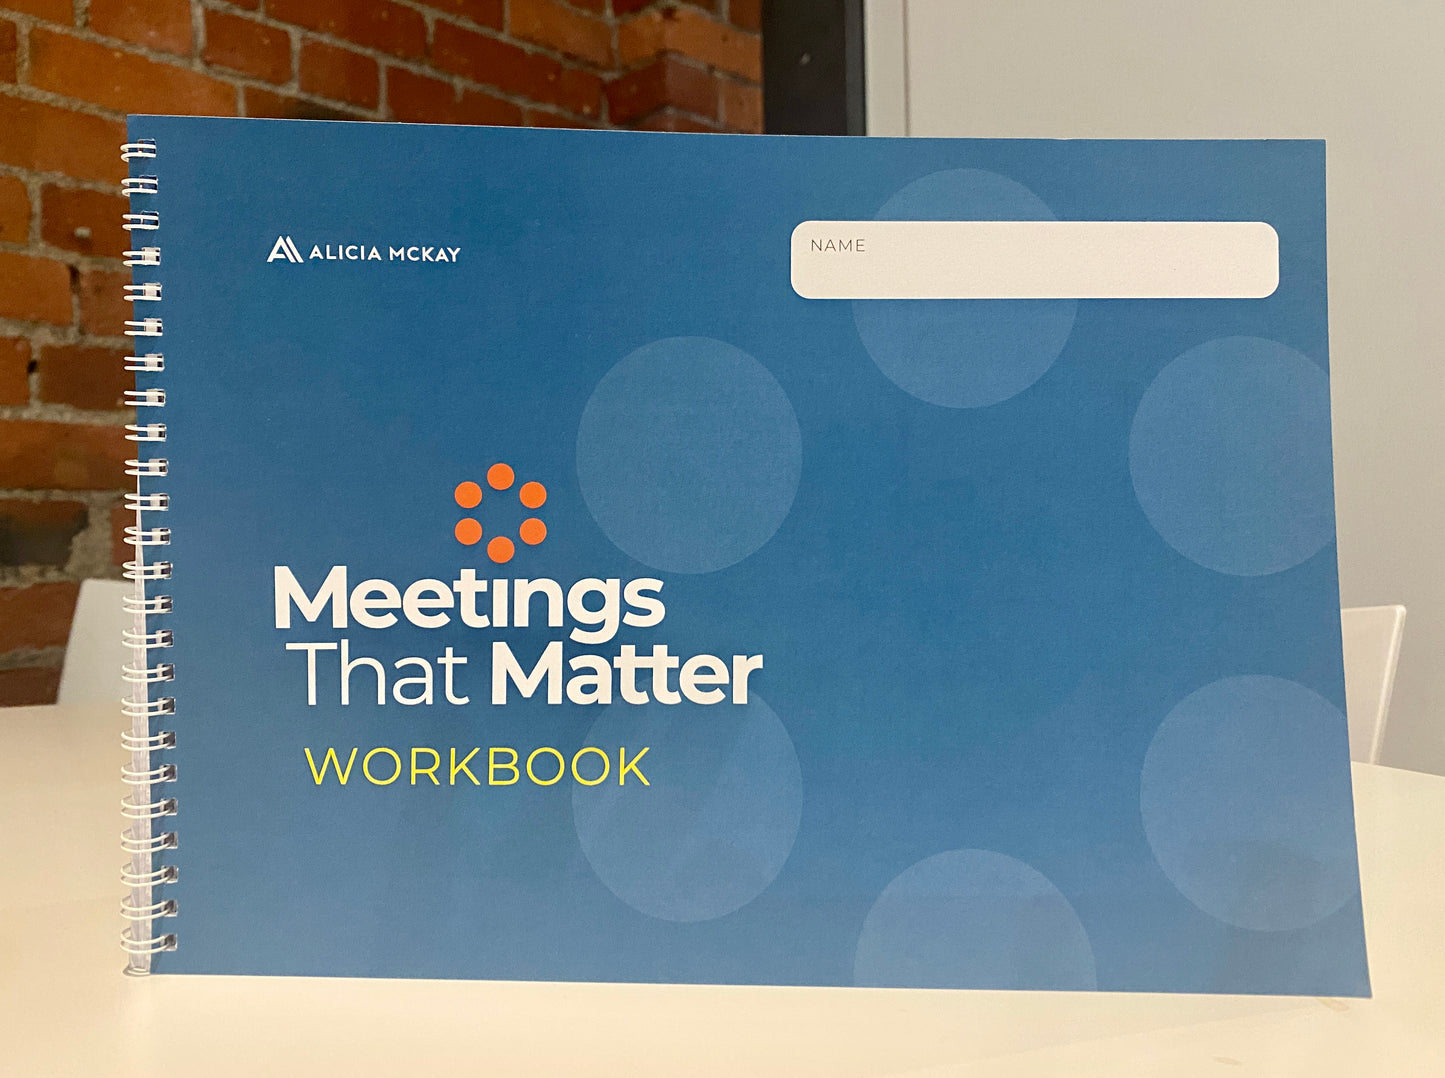 Meetings that Matter workbook - physical copy